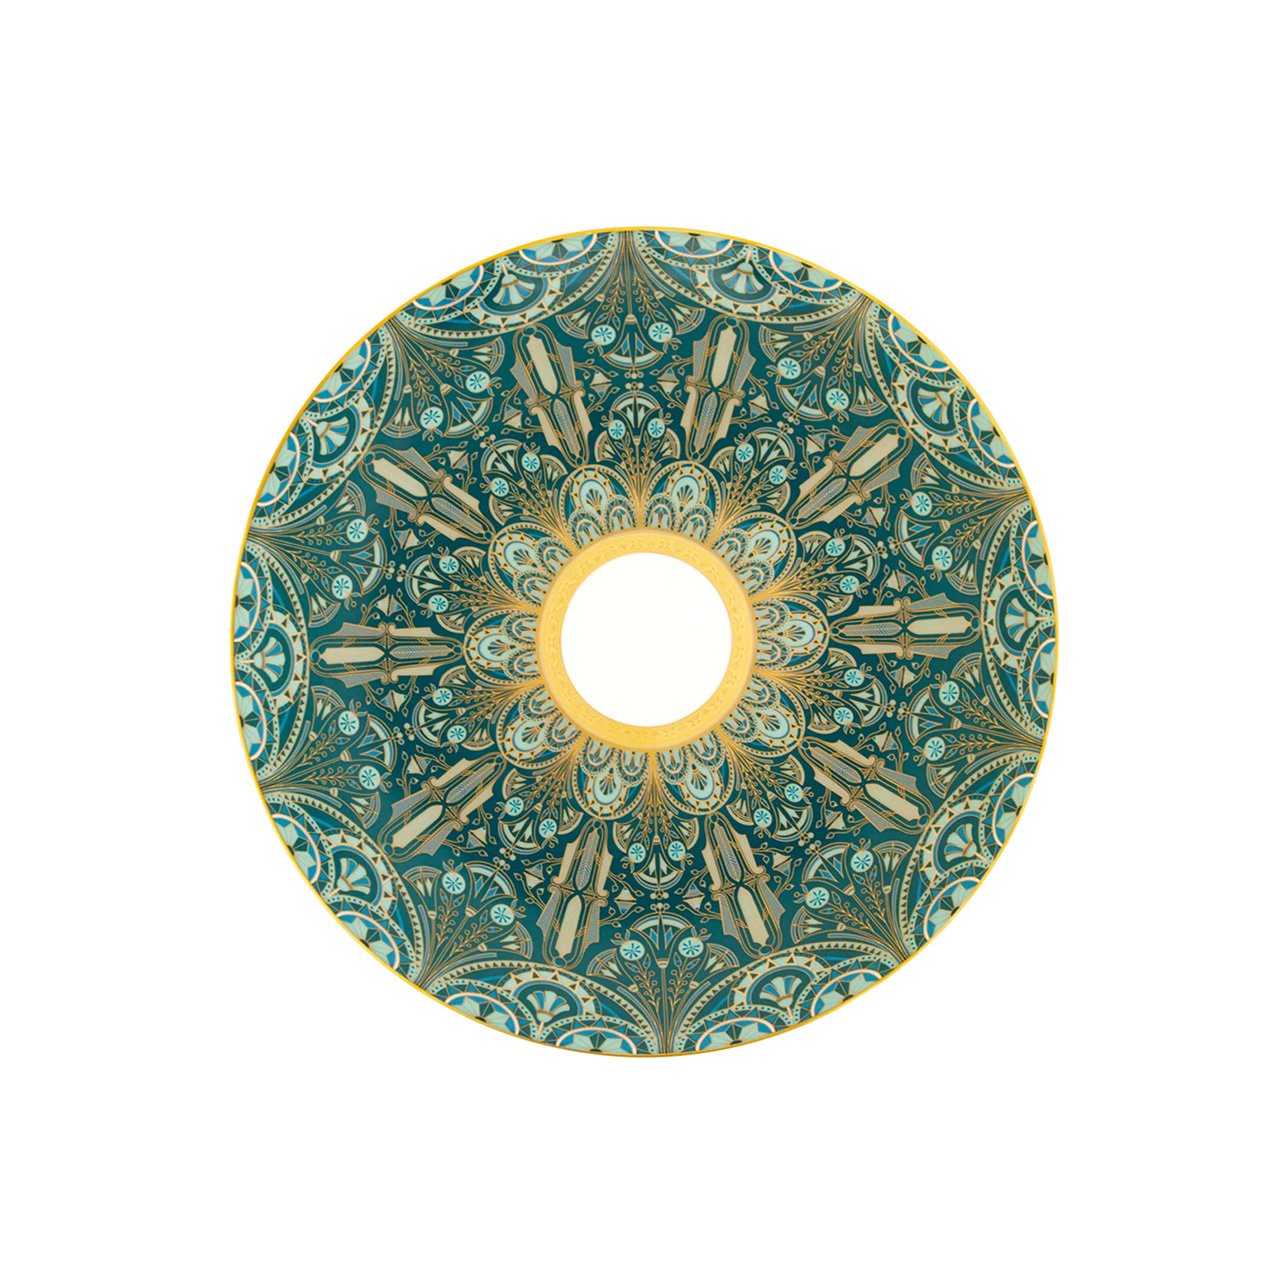 Haviland Rêves du Nil Collection Underplate with Blue and gold print